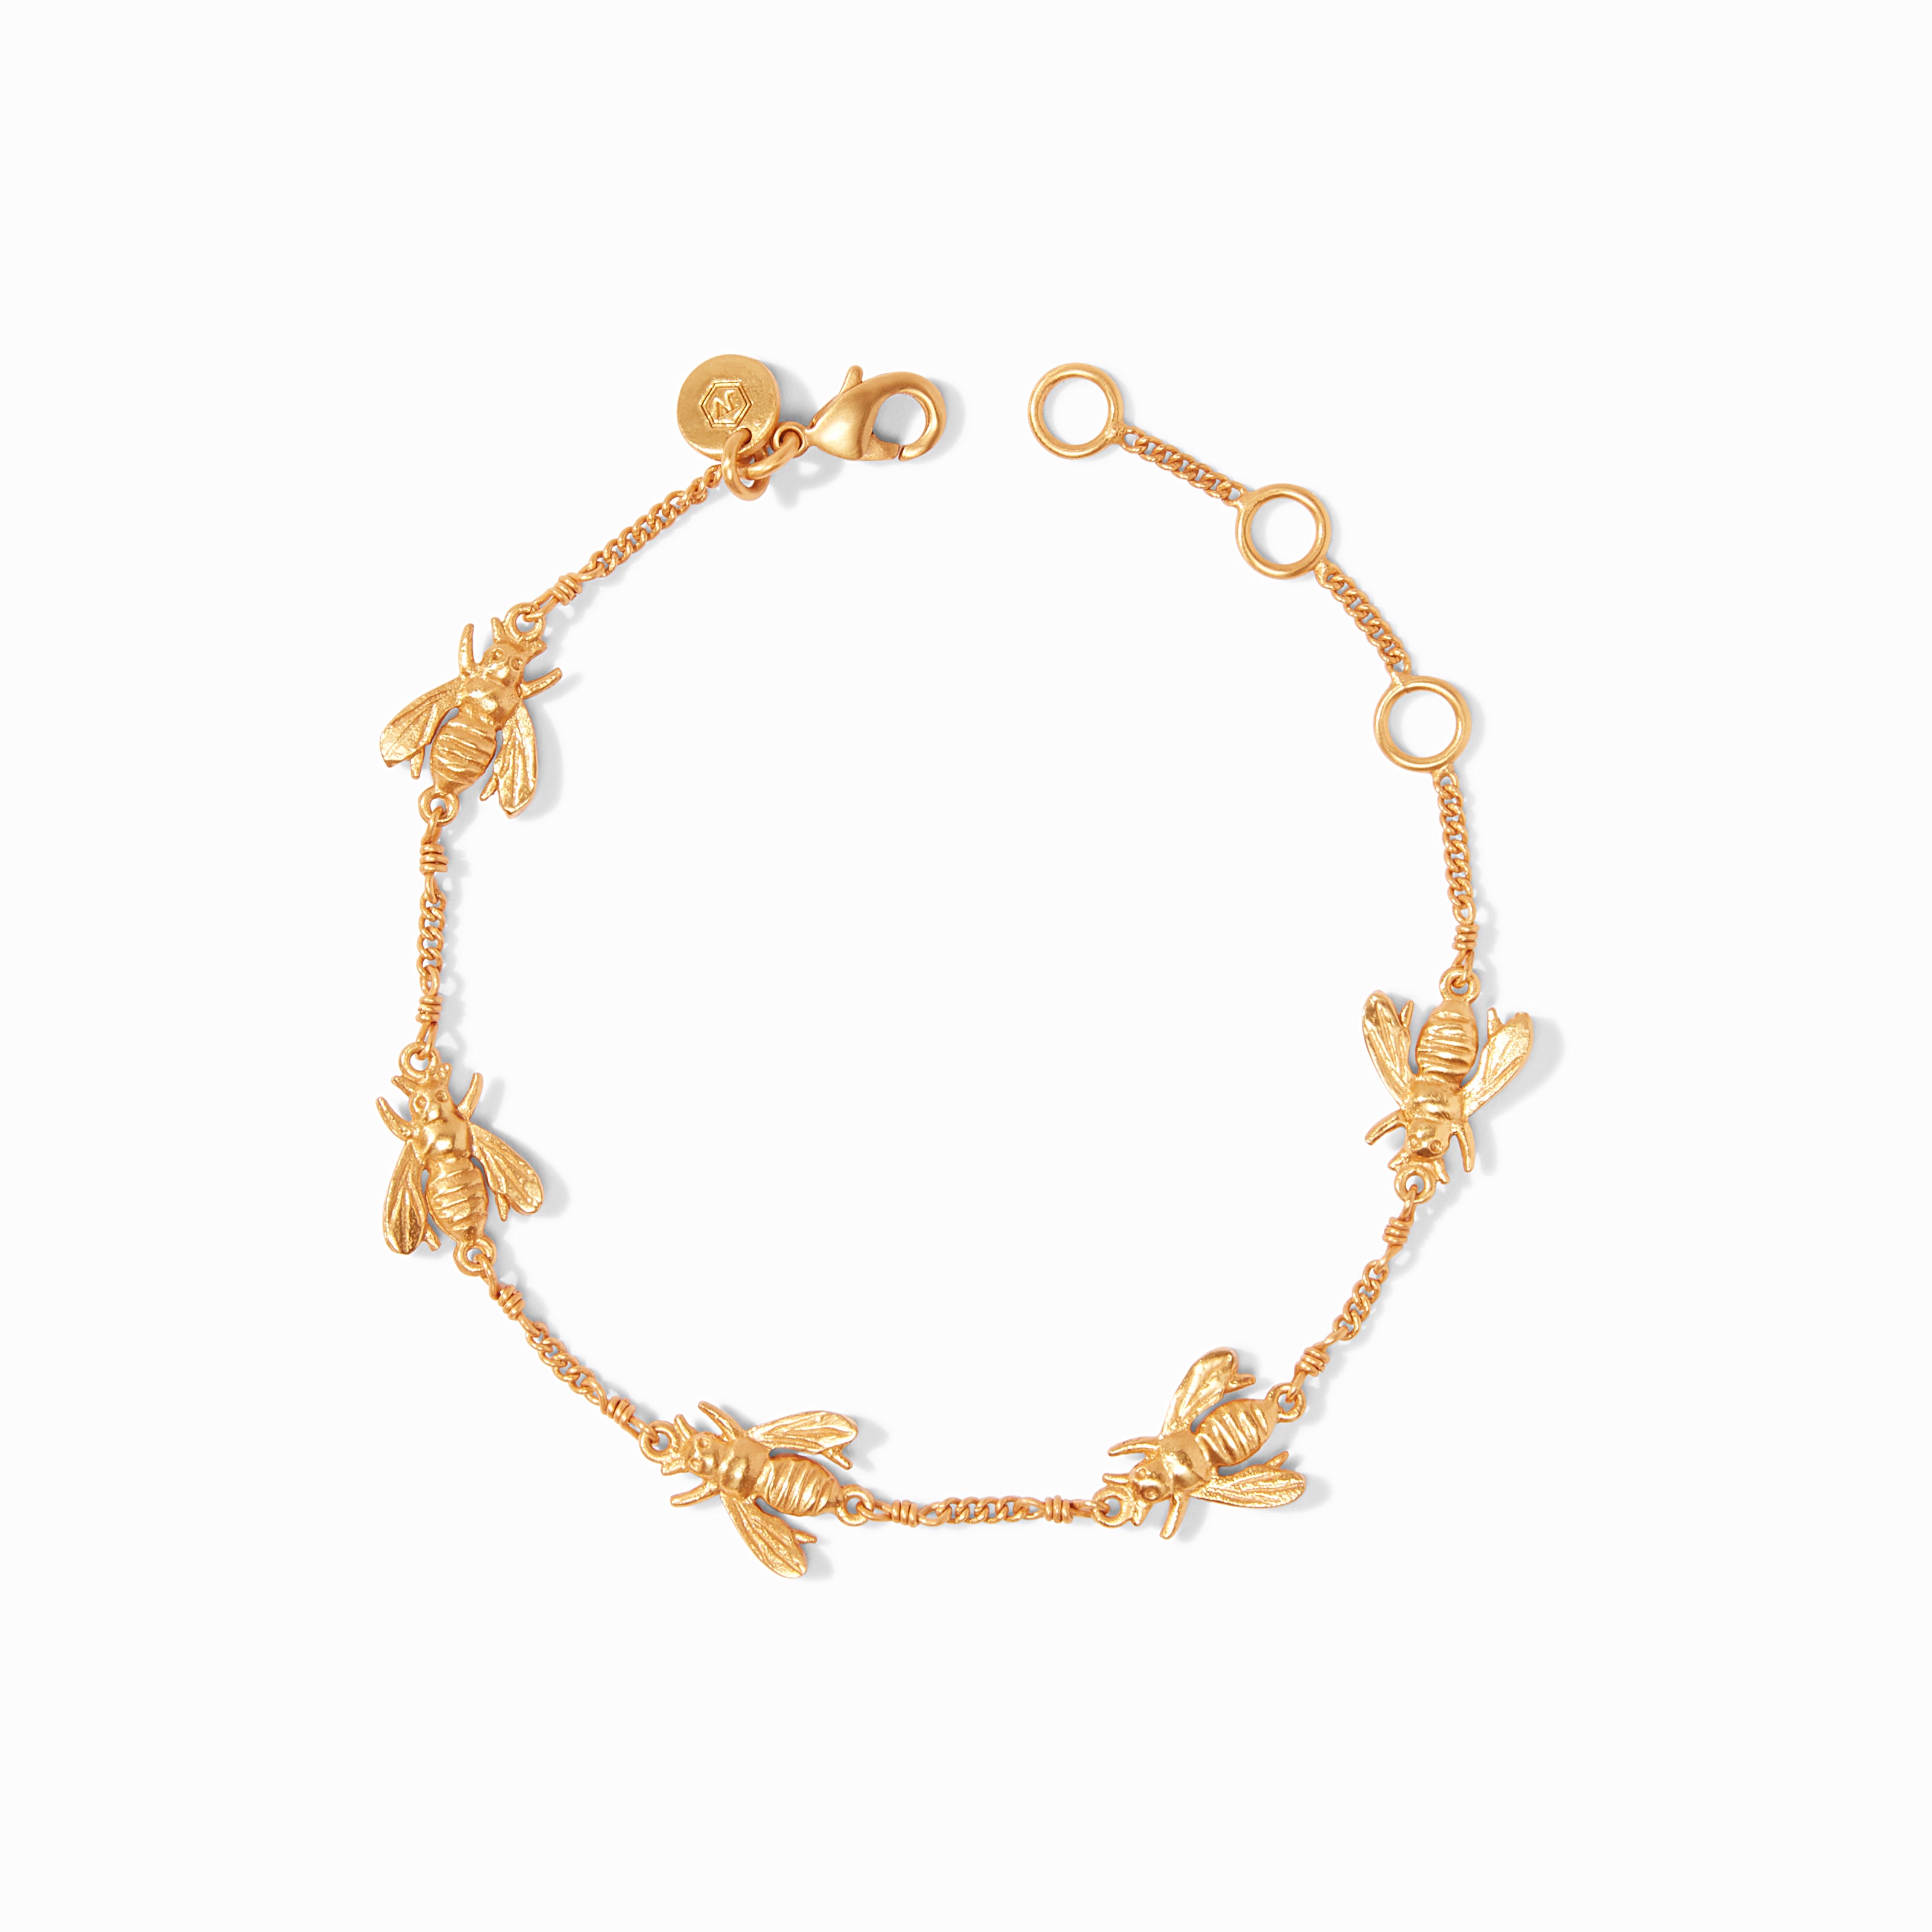 Delicate Gold Bracelet Designs  Simple Jewellery Collections for Daily  Wear B25926